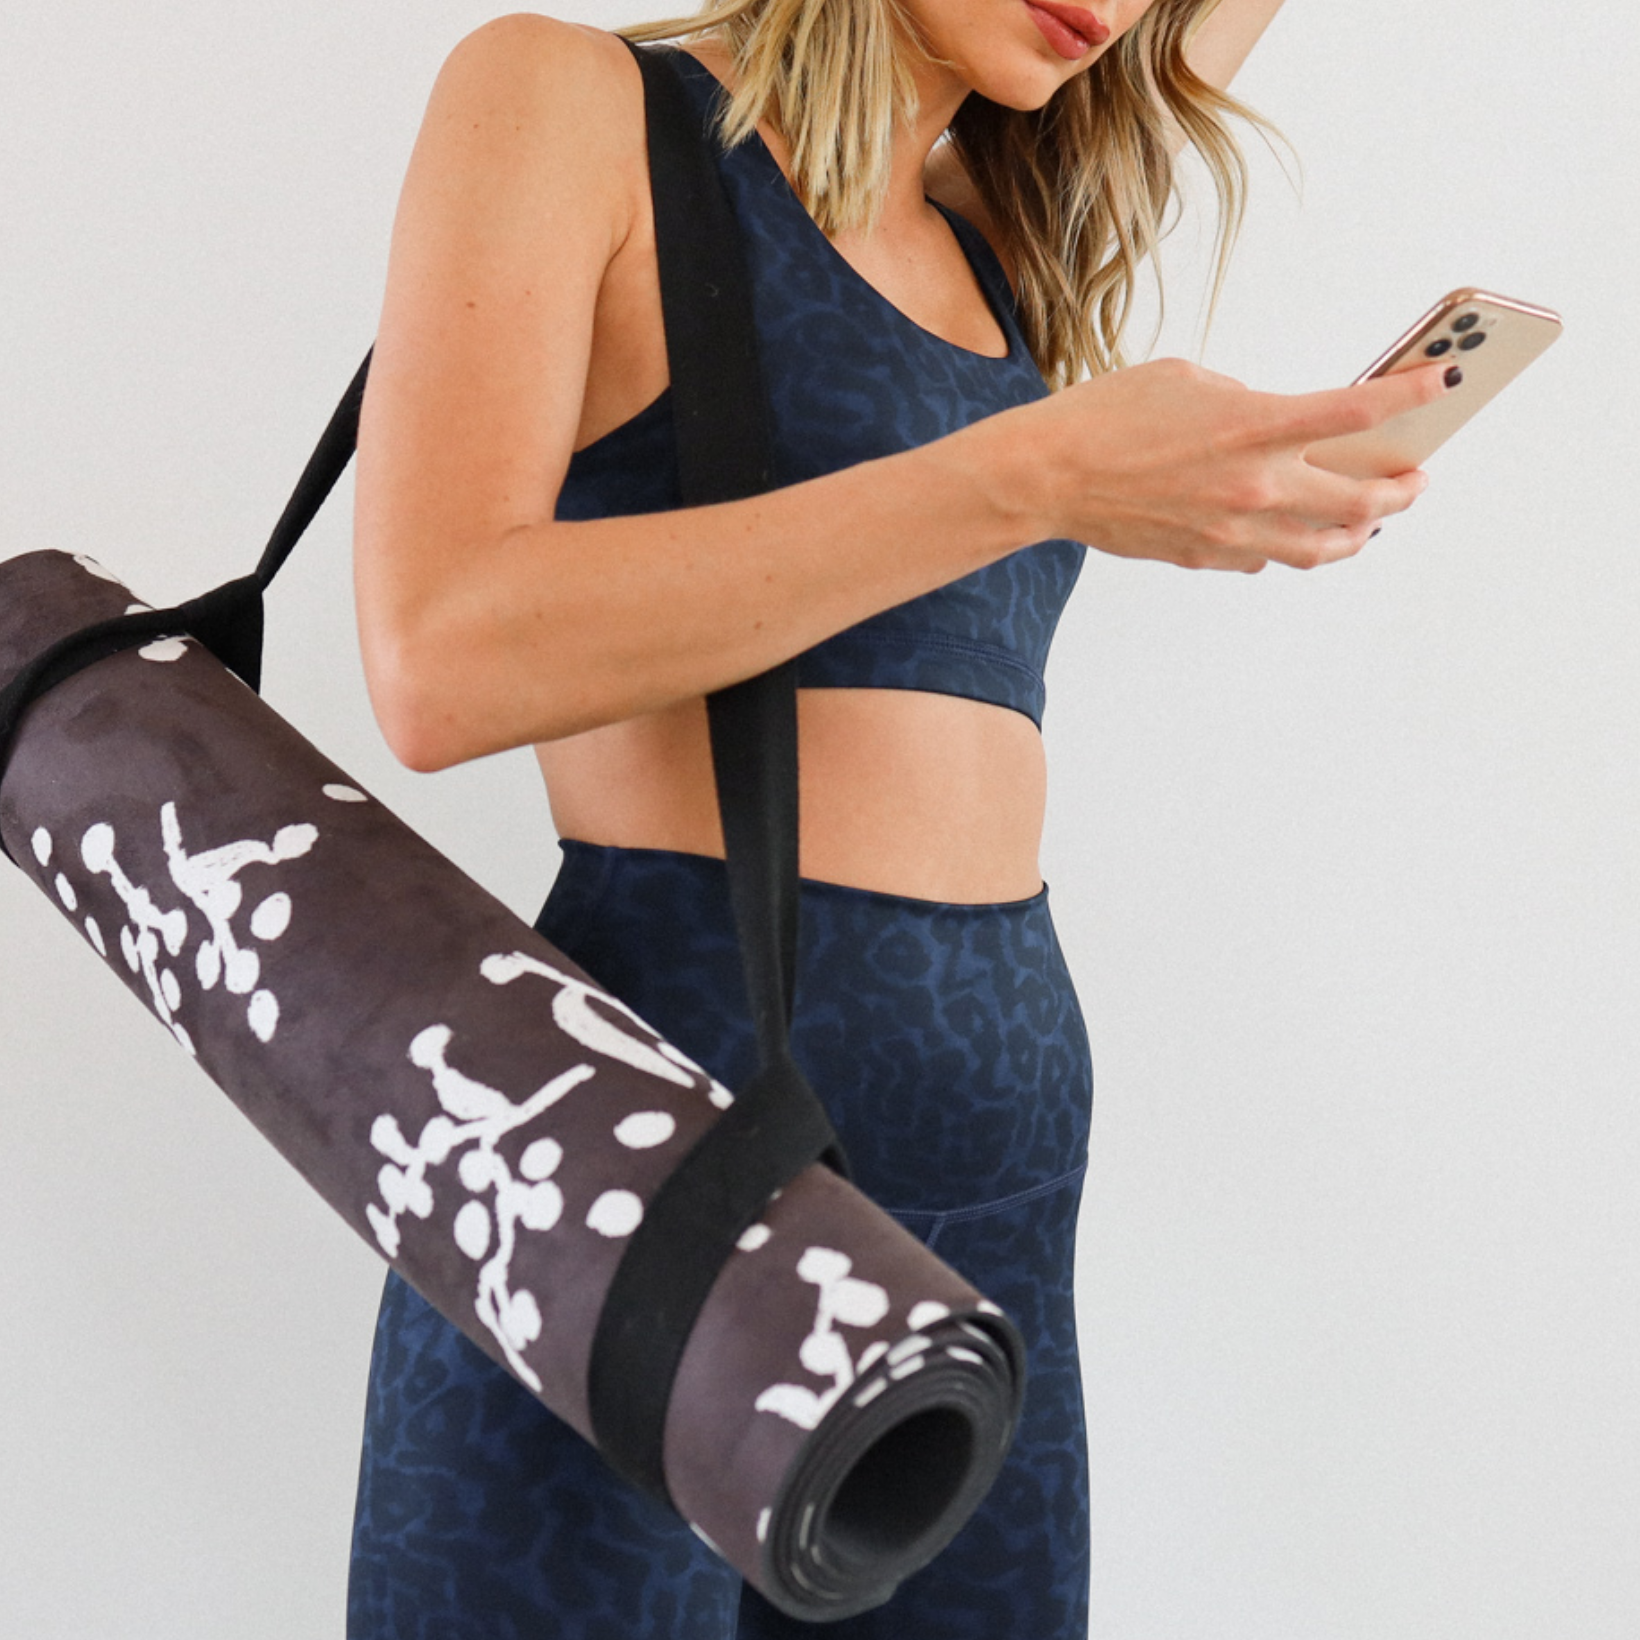 10 AT-HOME WORKOUT AND WELLNESS APPS WE LOVE